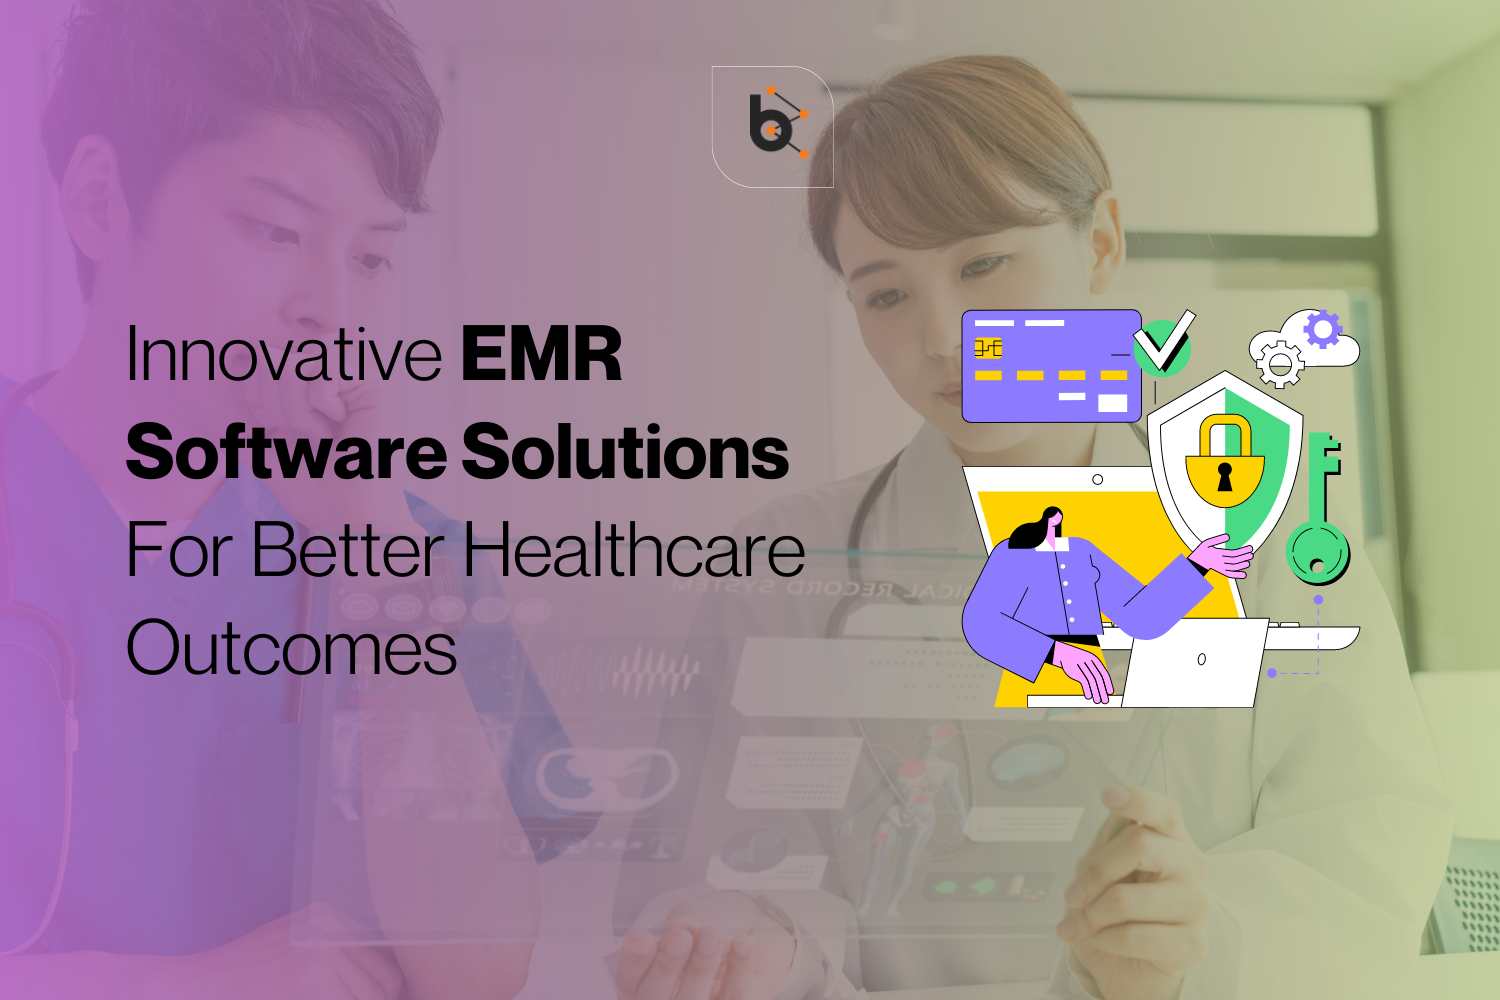 Innovative EMR Software Solutions For Better Healthcare Outcomes